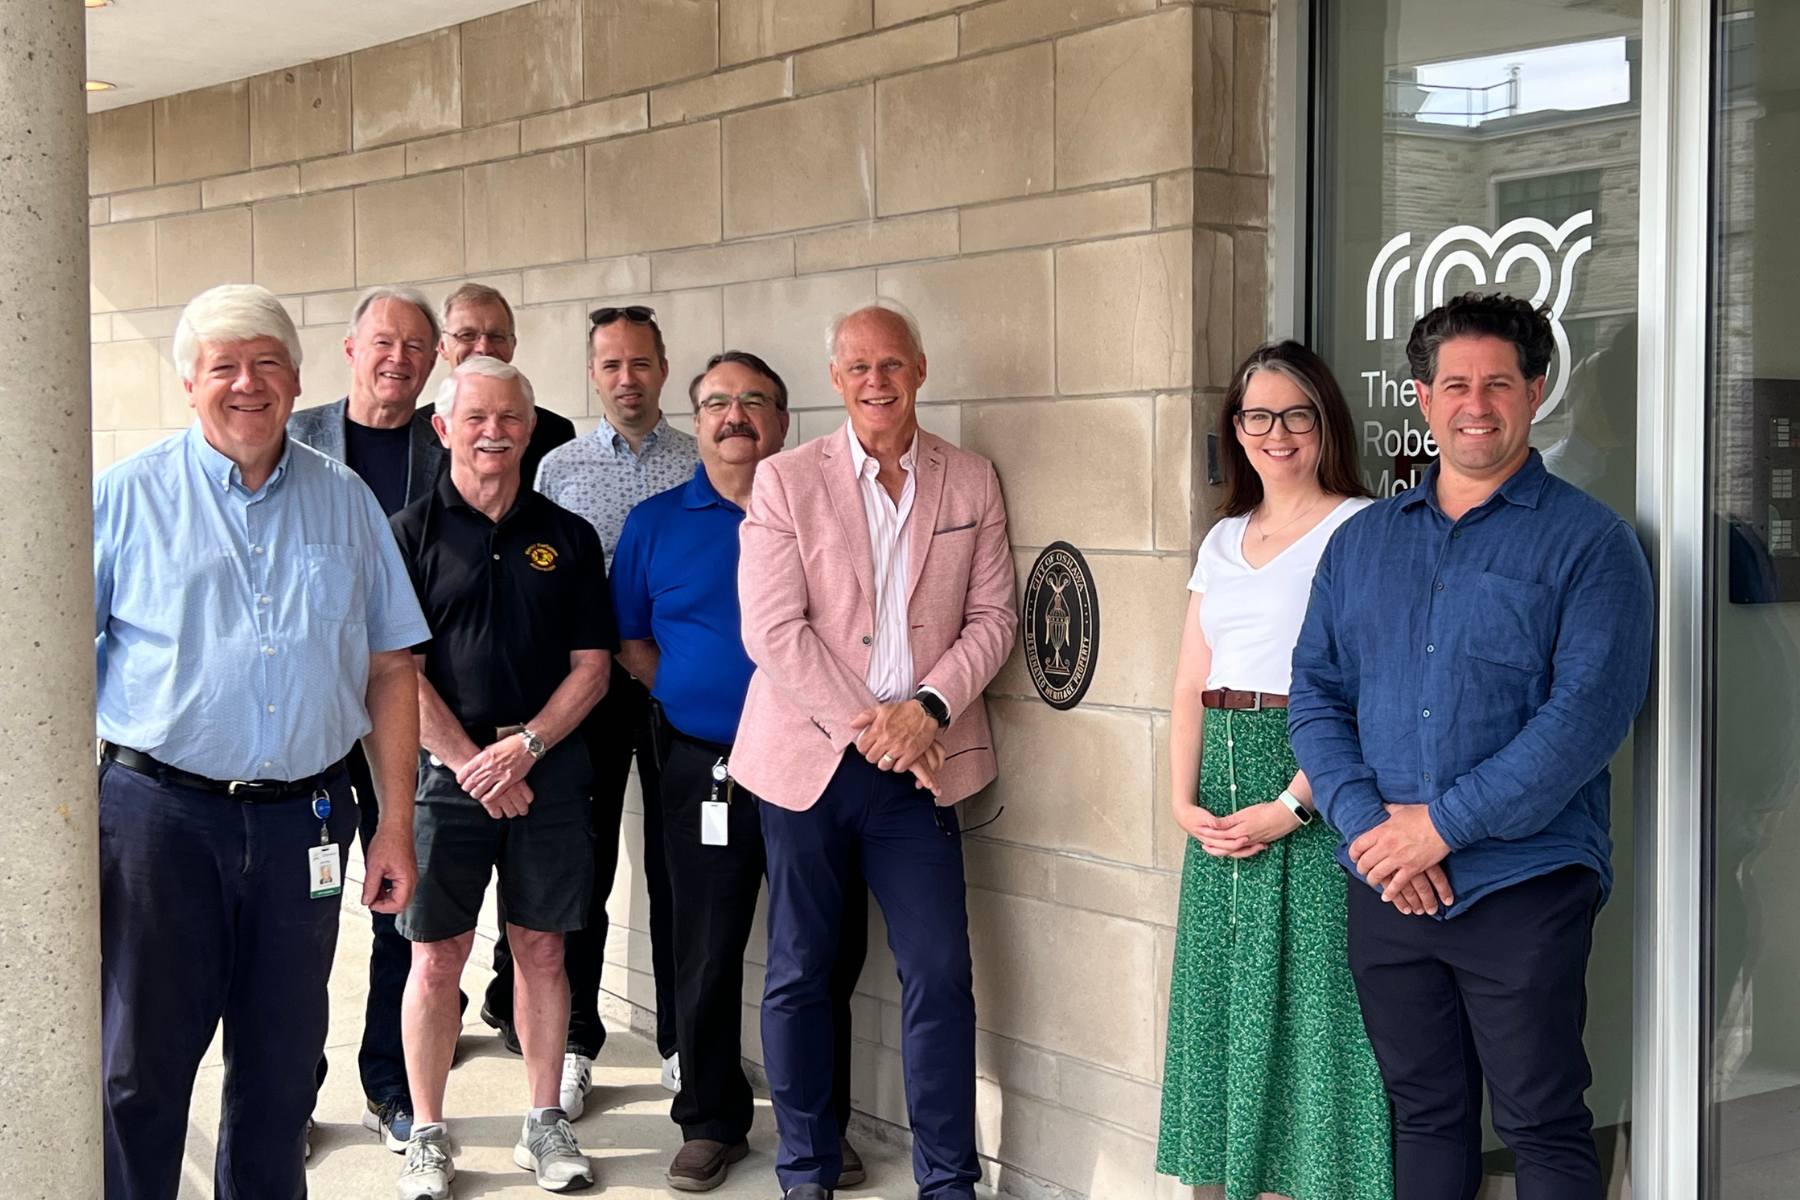 Members of Oshawa City Council joined Oshawa Hertige and The Robert McLaughlin Gallery representatives to recognize The RMG’s building Hertitage Designation.